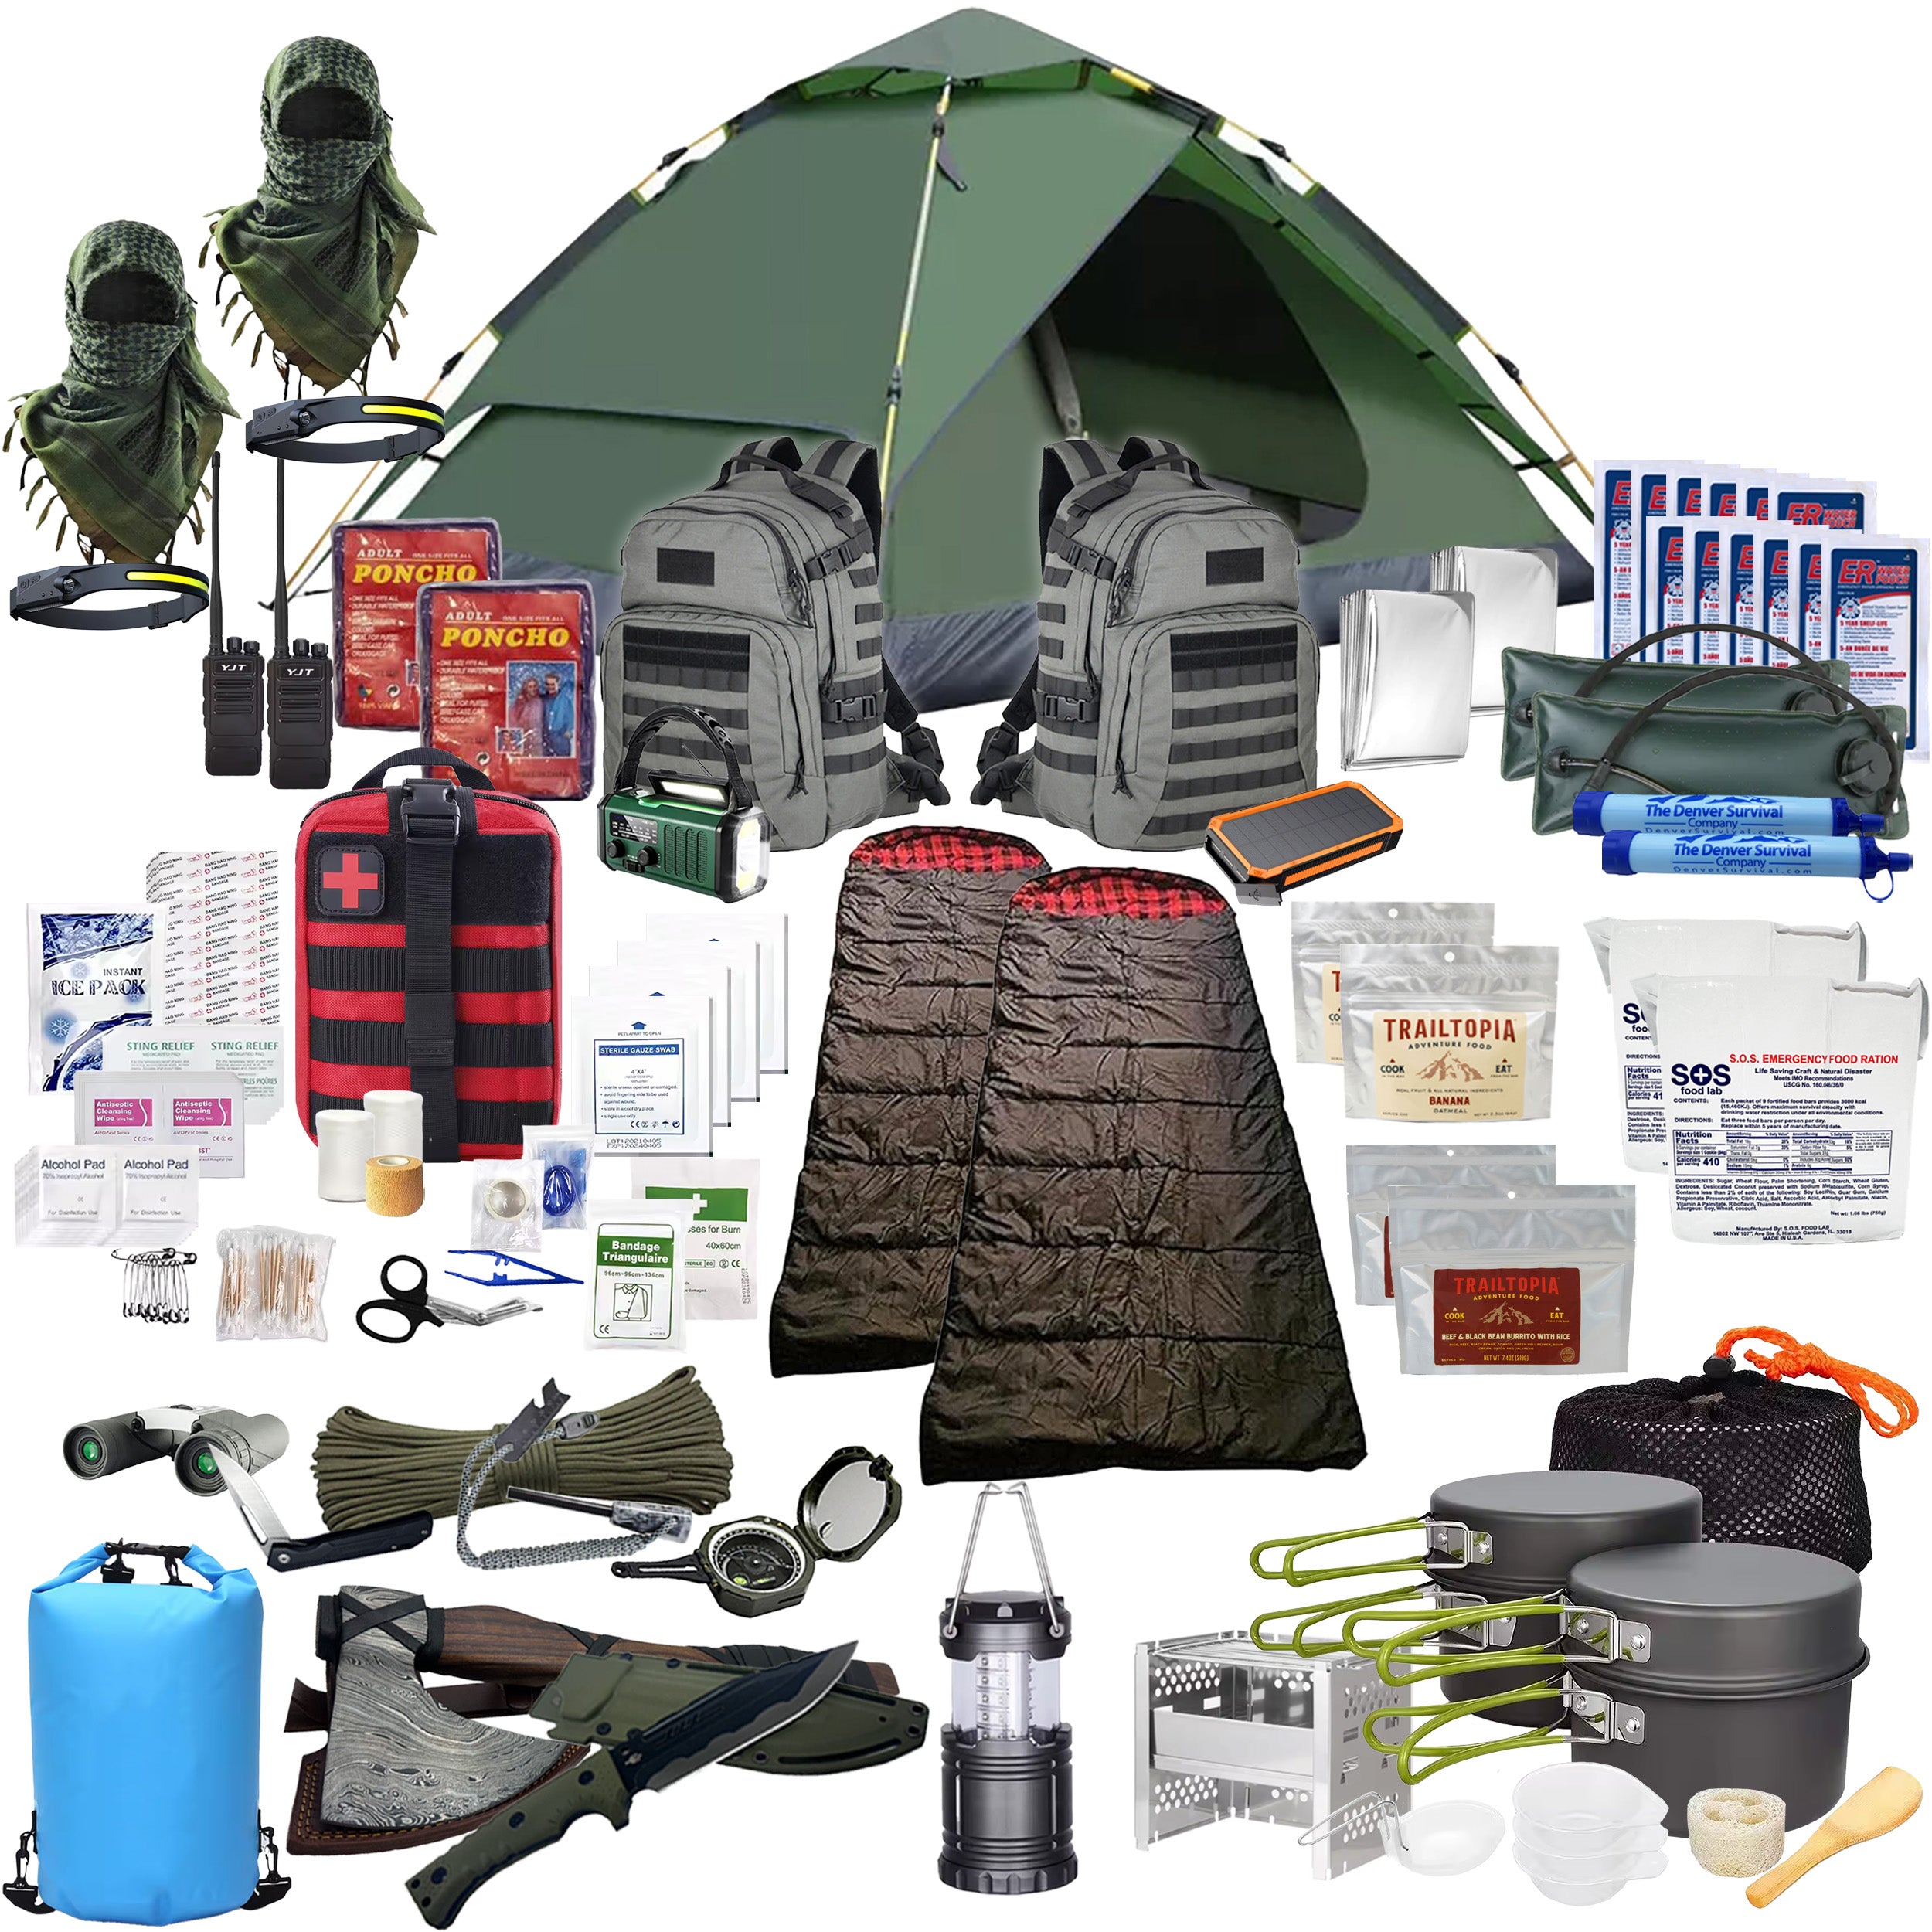 Premium 2 Person 72 Hour Survival Bag with High Quality Survival Tools